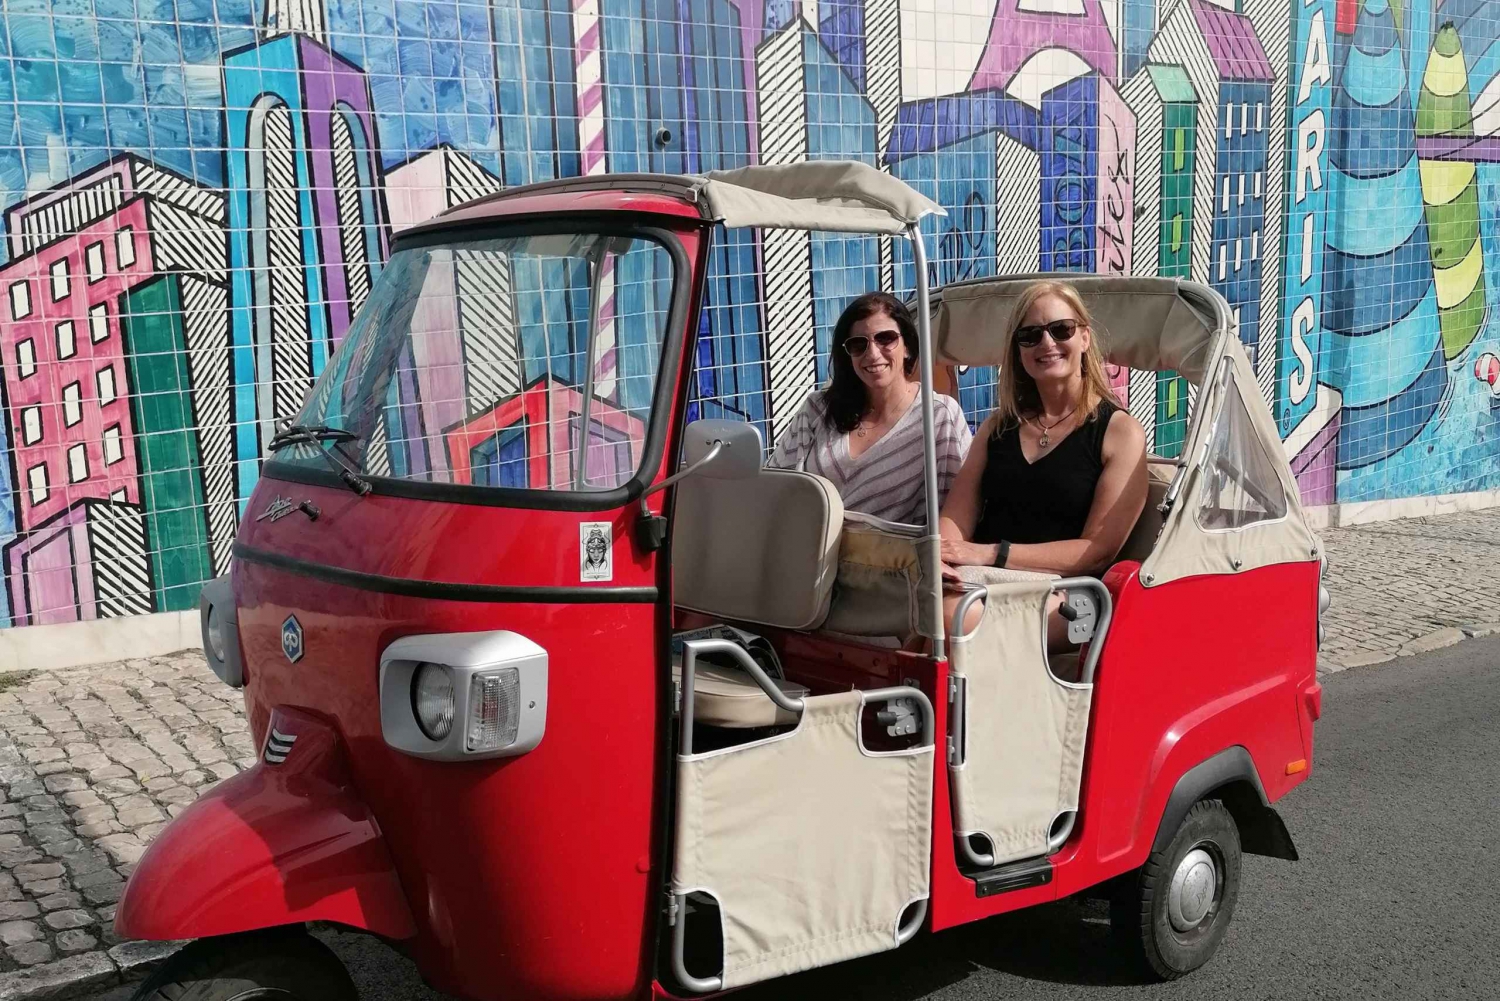 Get a TukTuk tour with a local guide!